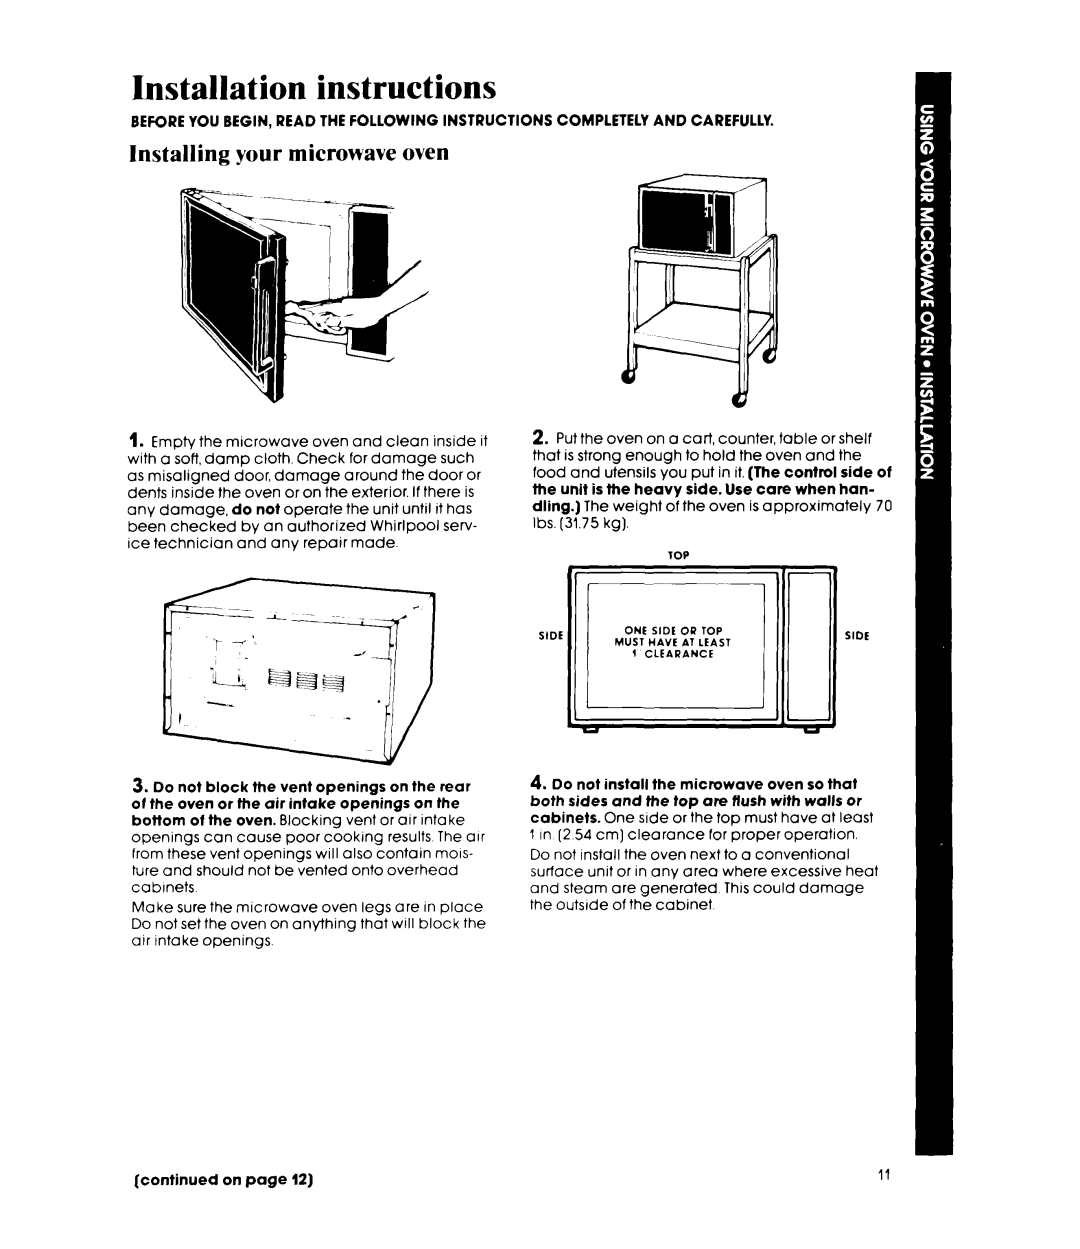 Whirlpool MW8300XP manual installation instructions, Installing your microwave oven 